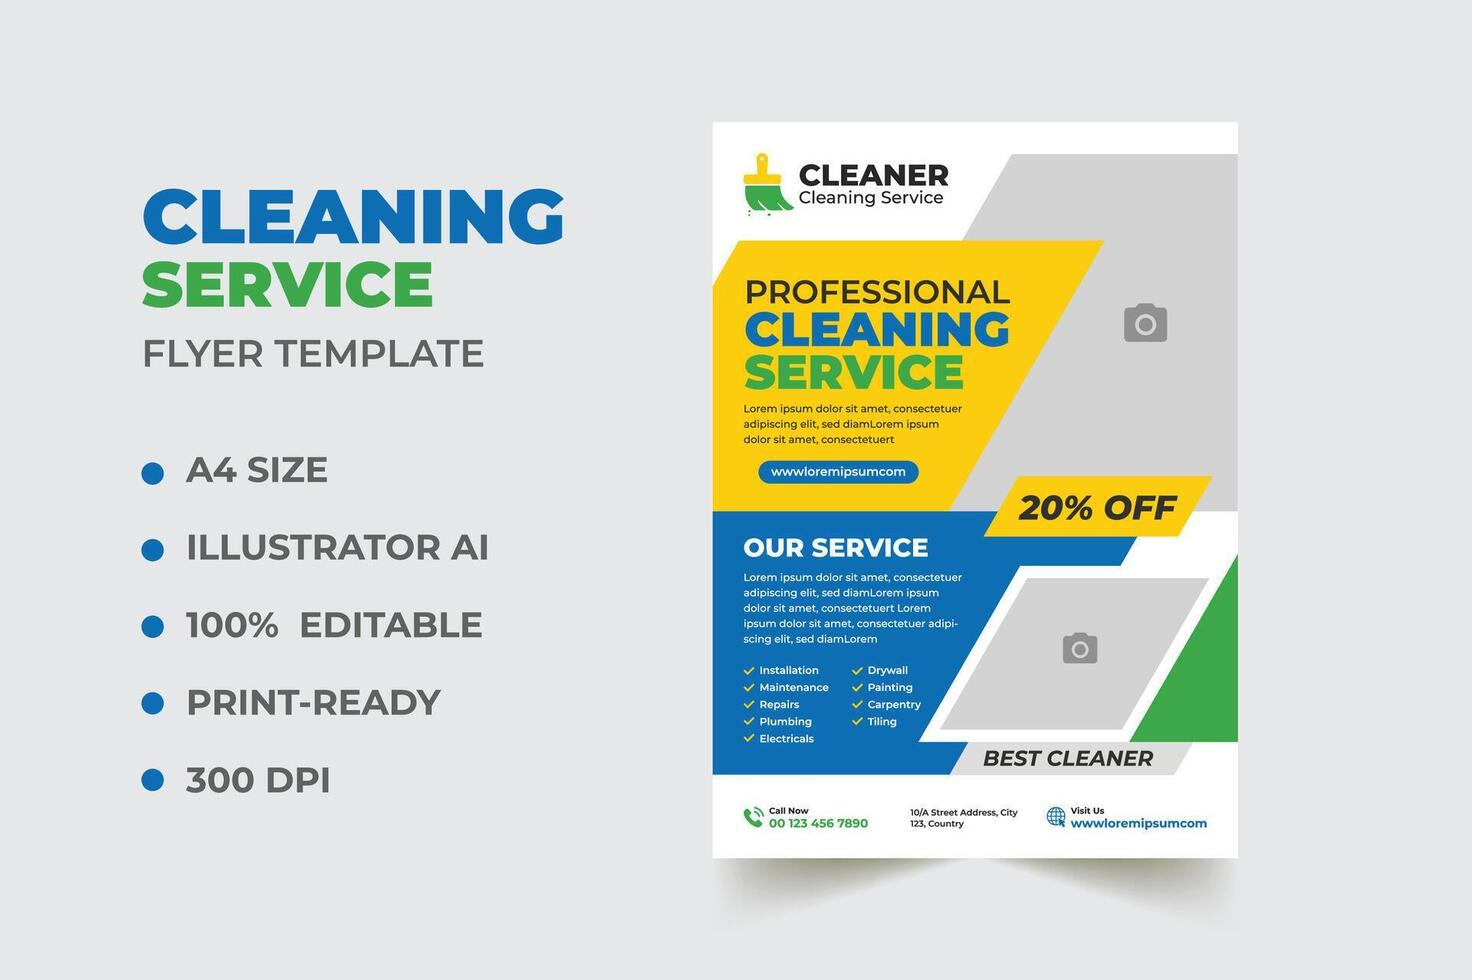 Professional cleaning service print flyer and poster editable template, Home Maid service, cleaning leaflet, pamphlet suitable for housekeeper business promotional marketing flyer design vector